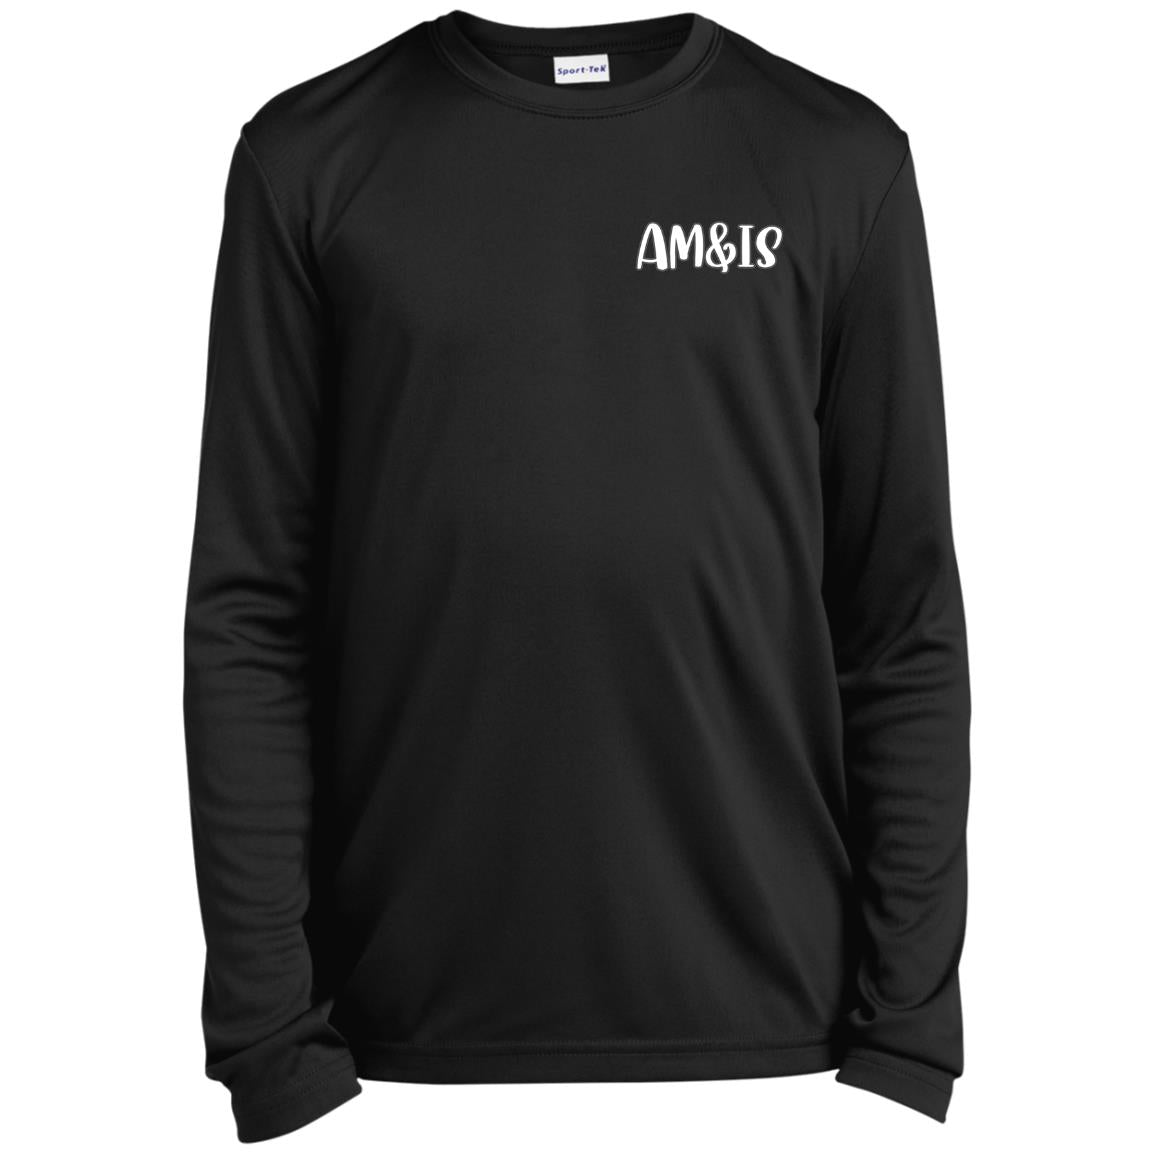 BLACK AM&IS Activewear Youth Long Sleeve Performance Tee - kid's t-shirts at TFC&H Co.